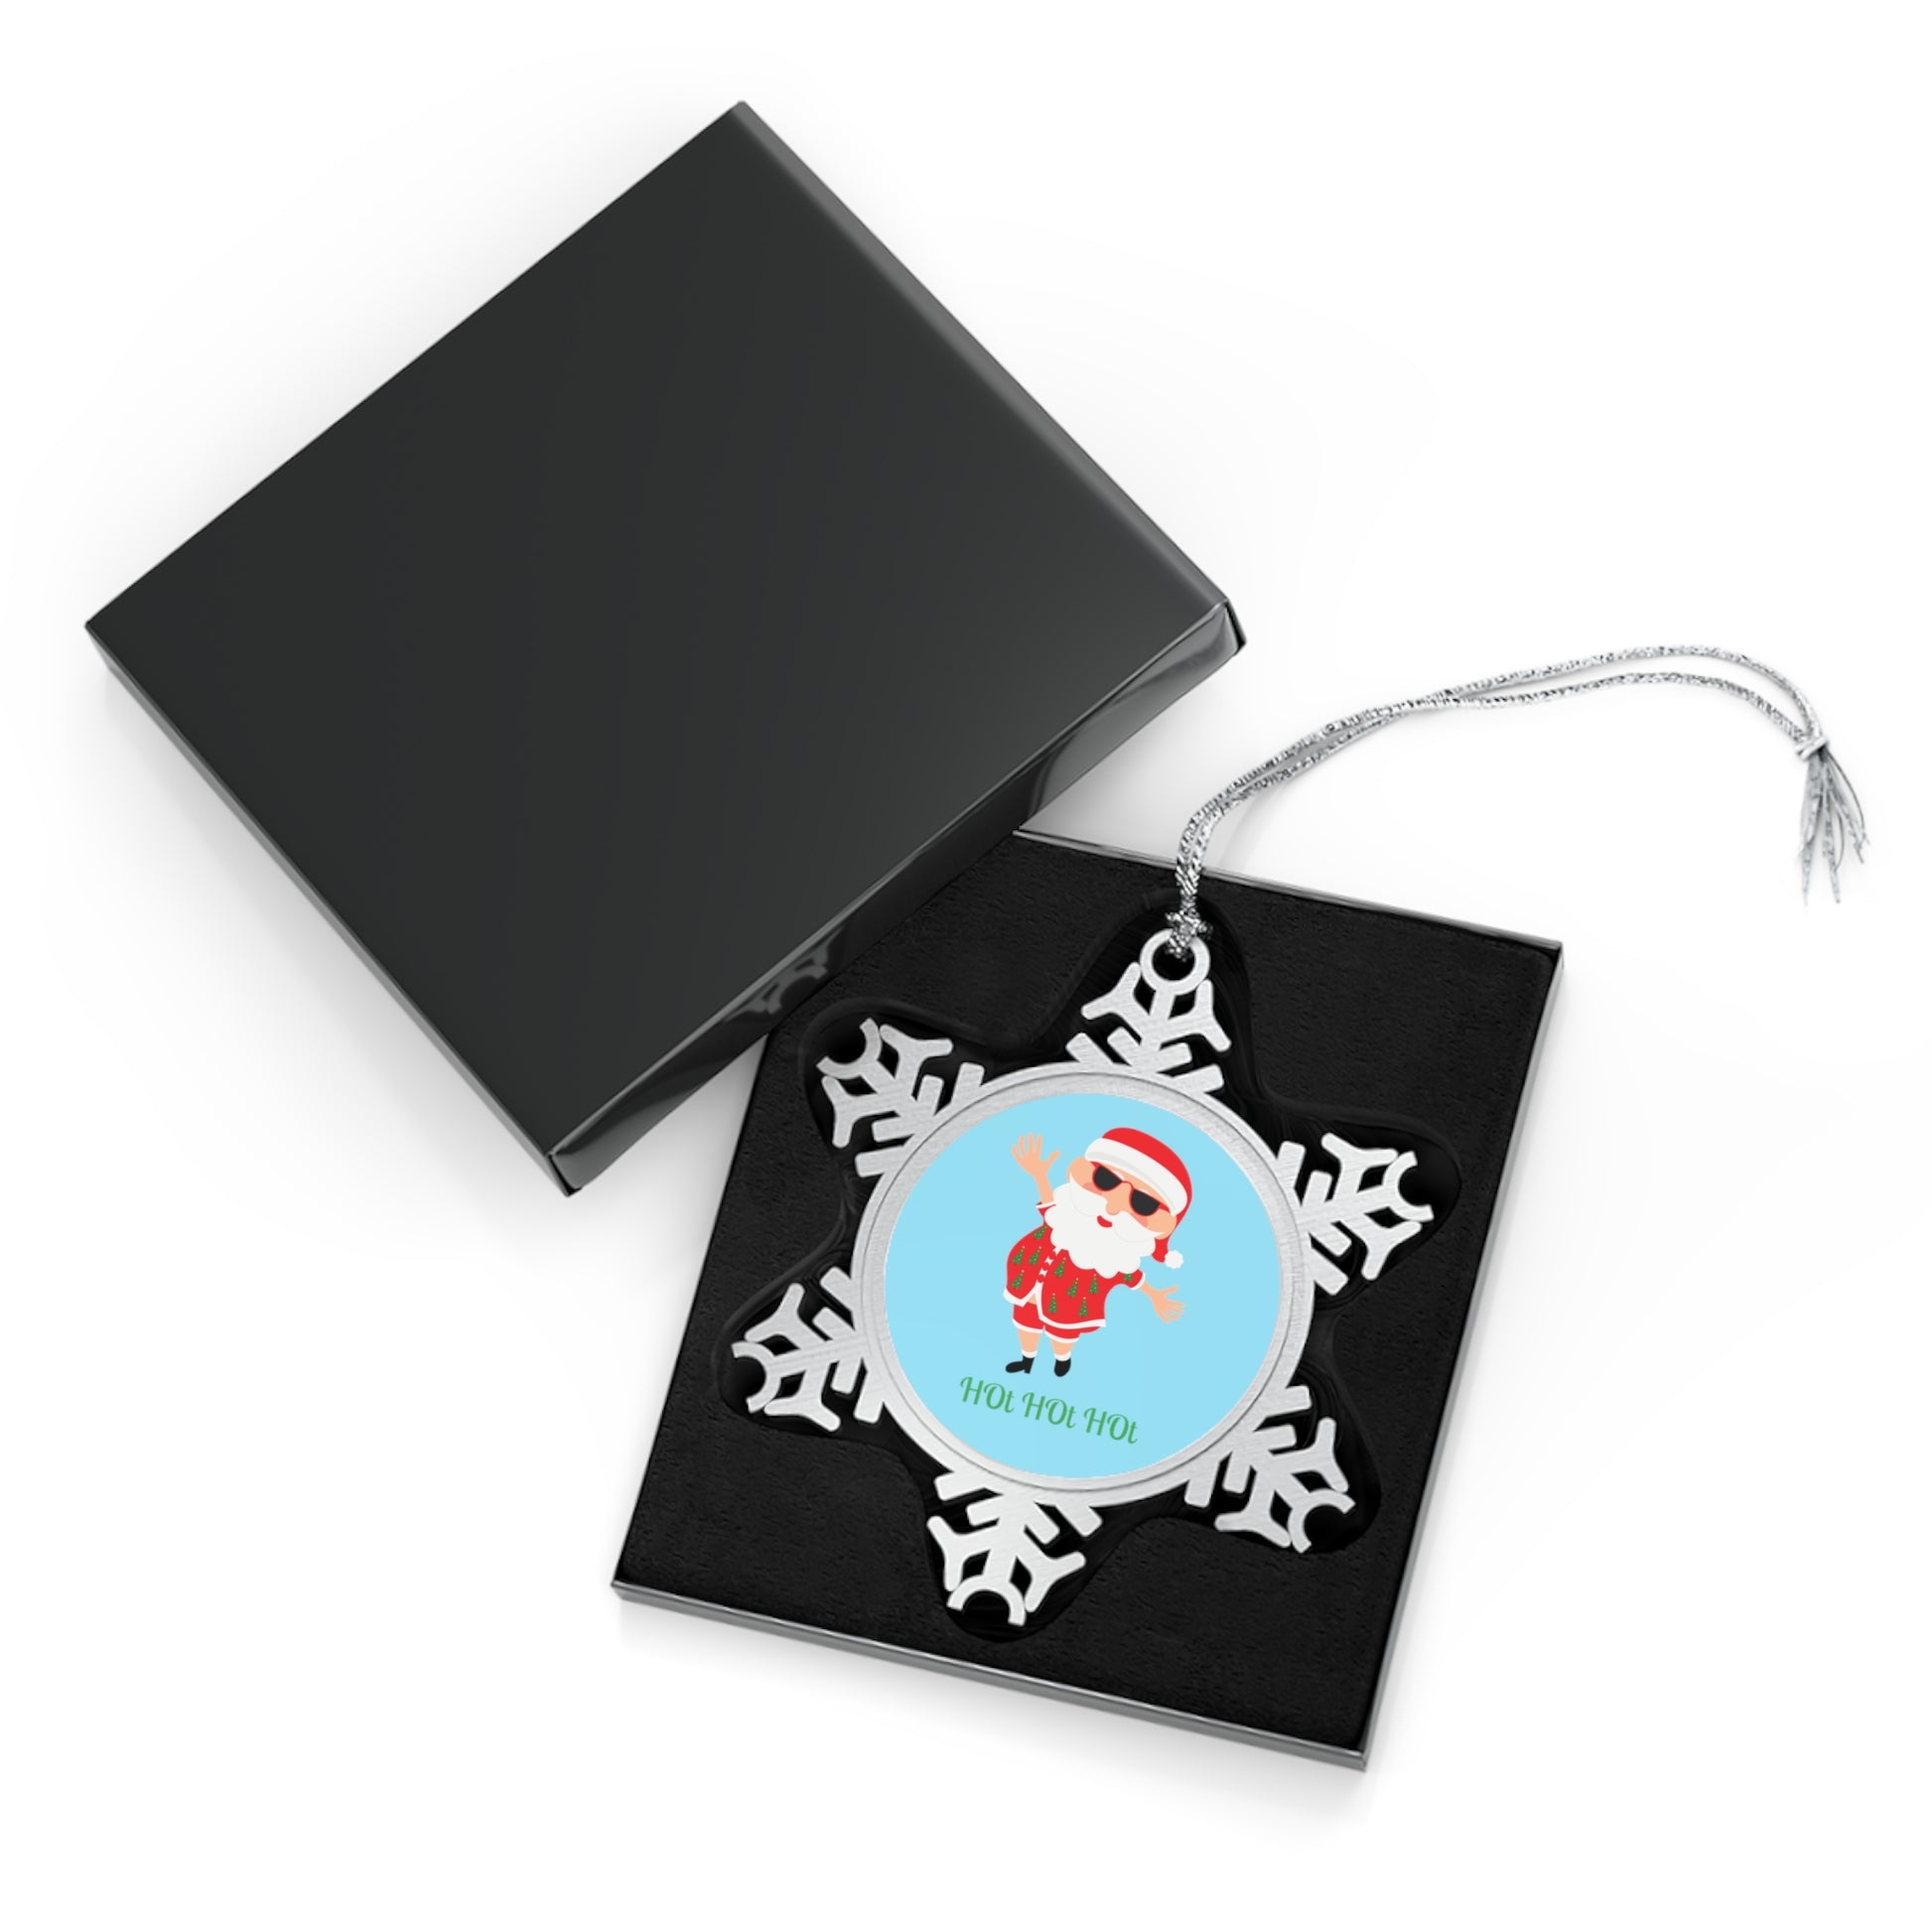 HOt HOt HOt - Pewter Snowflake Ornament Christmas Ornament